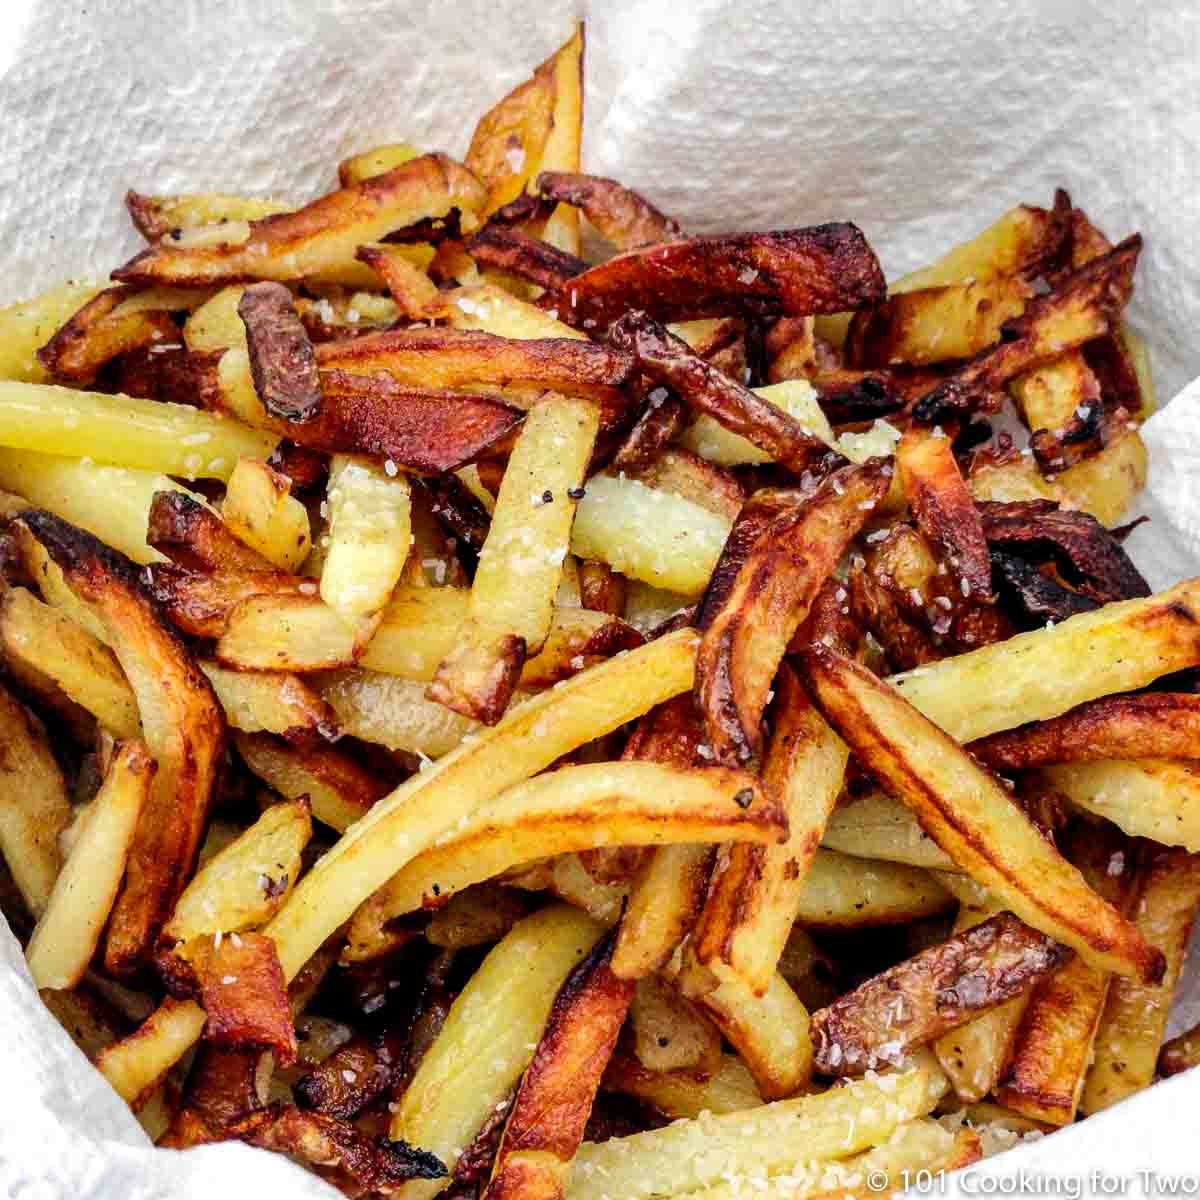 fries in white bowl with towels